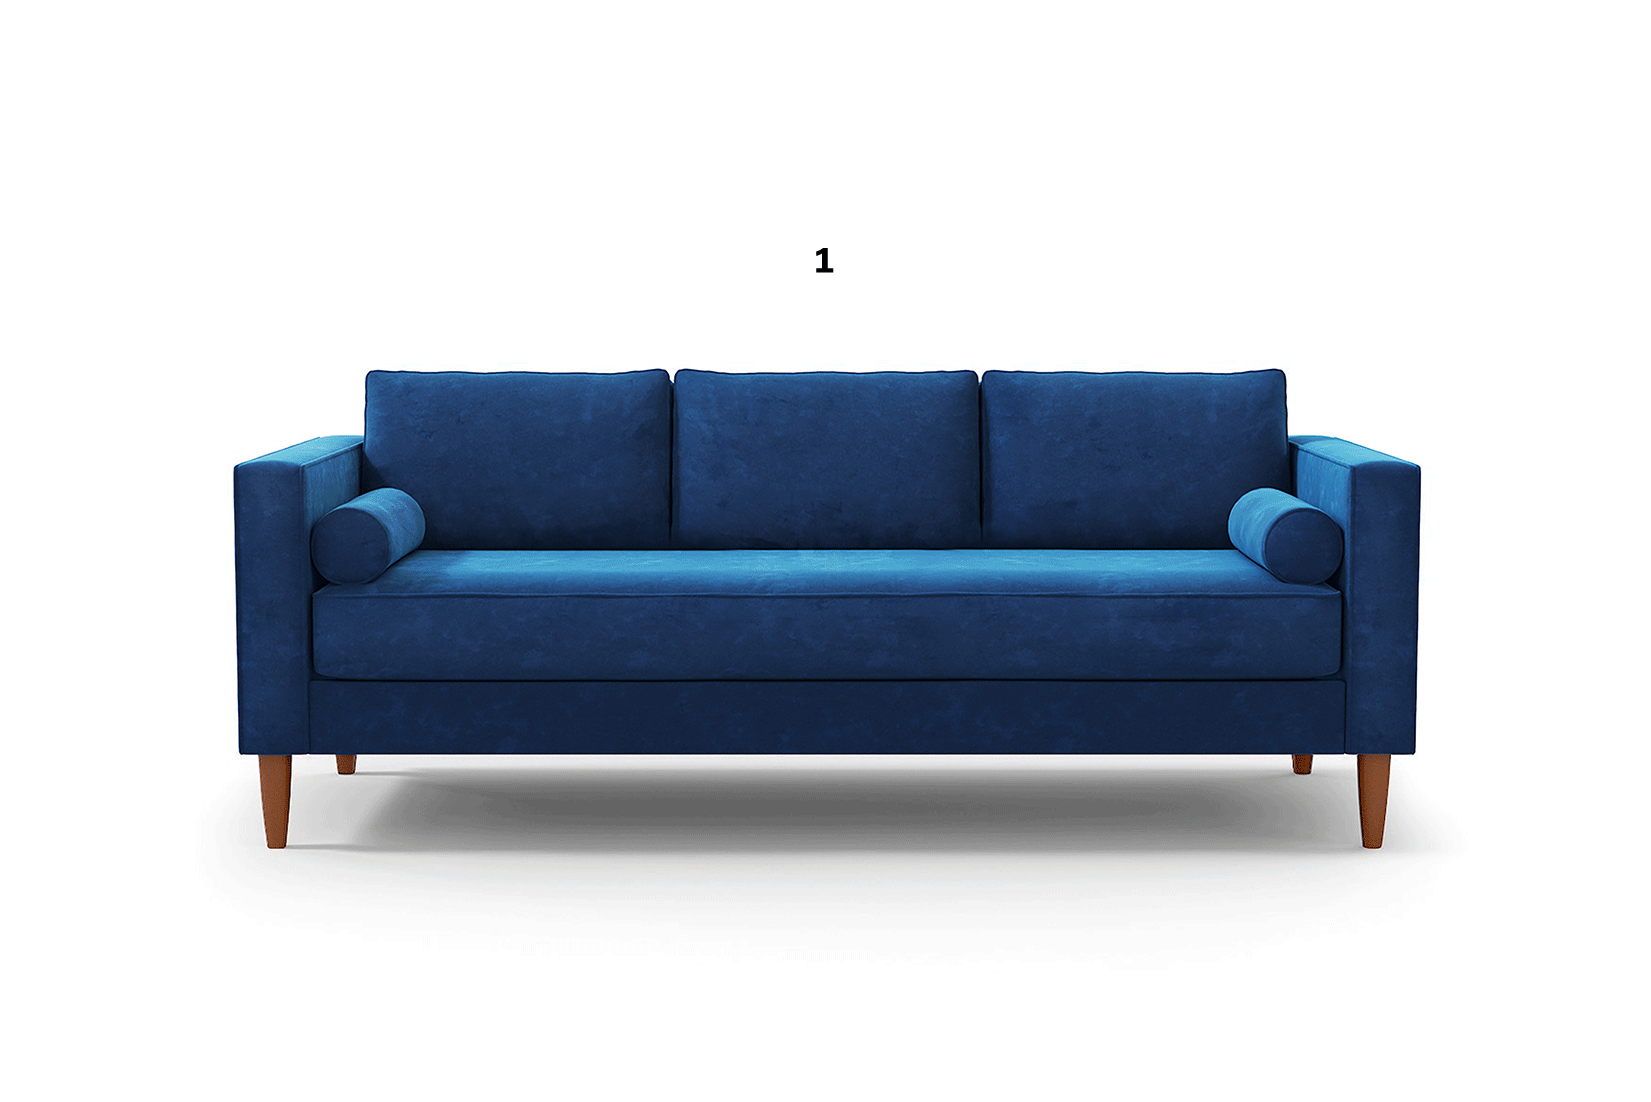 Sofa Secrets: How to Choose the Right Seat Depth and Cushions